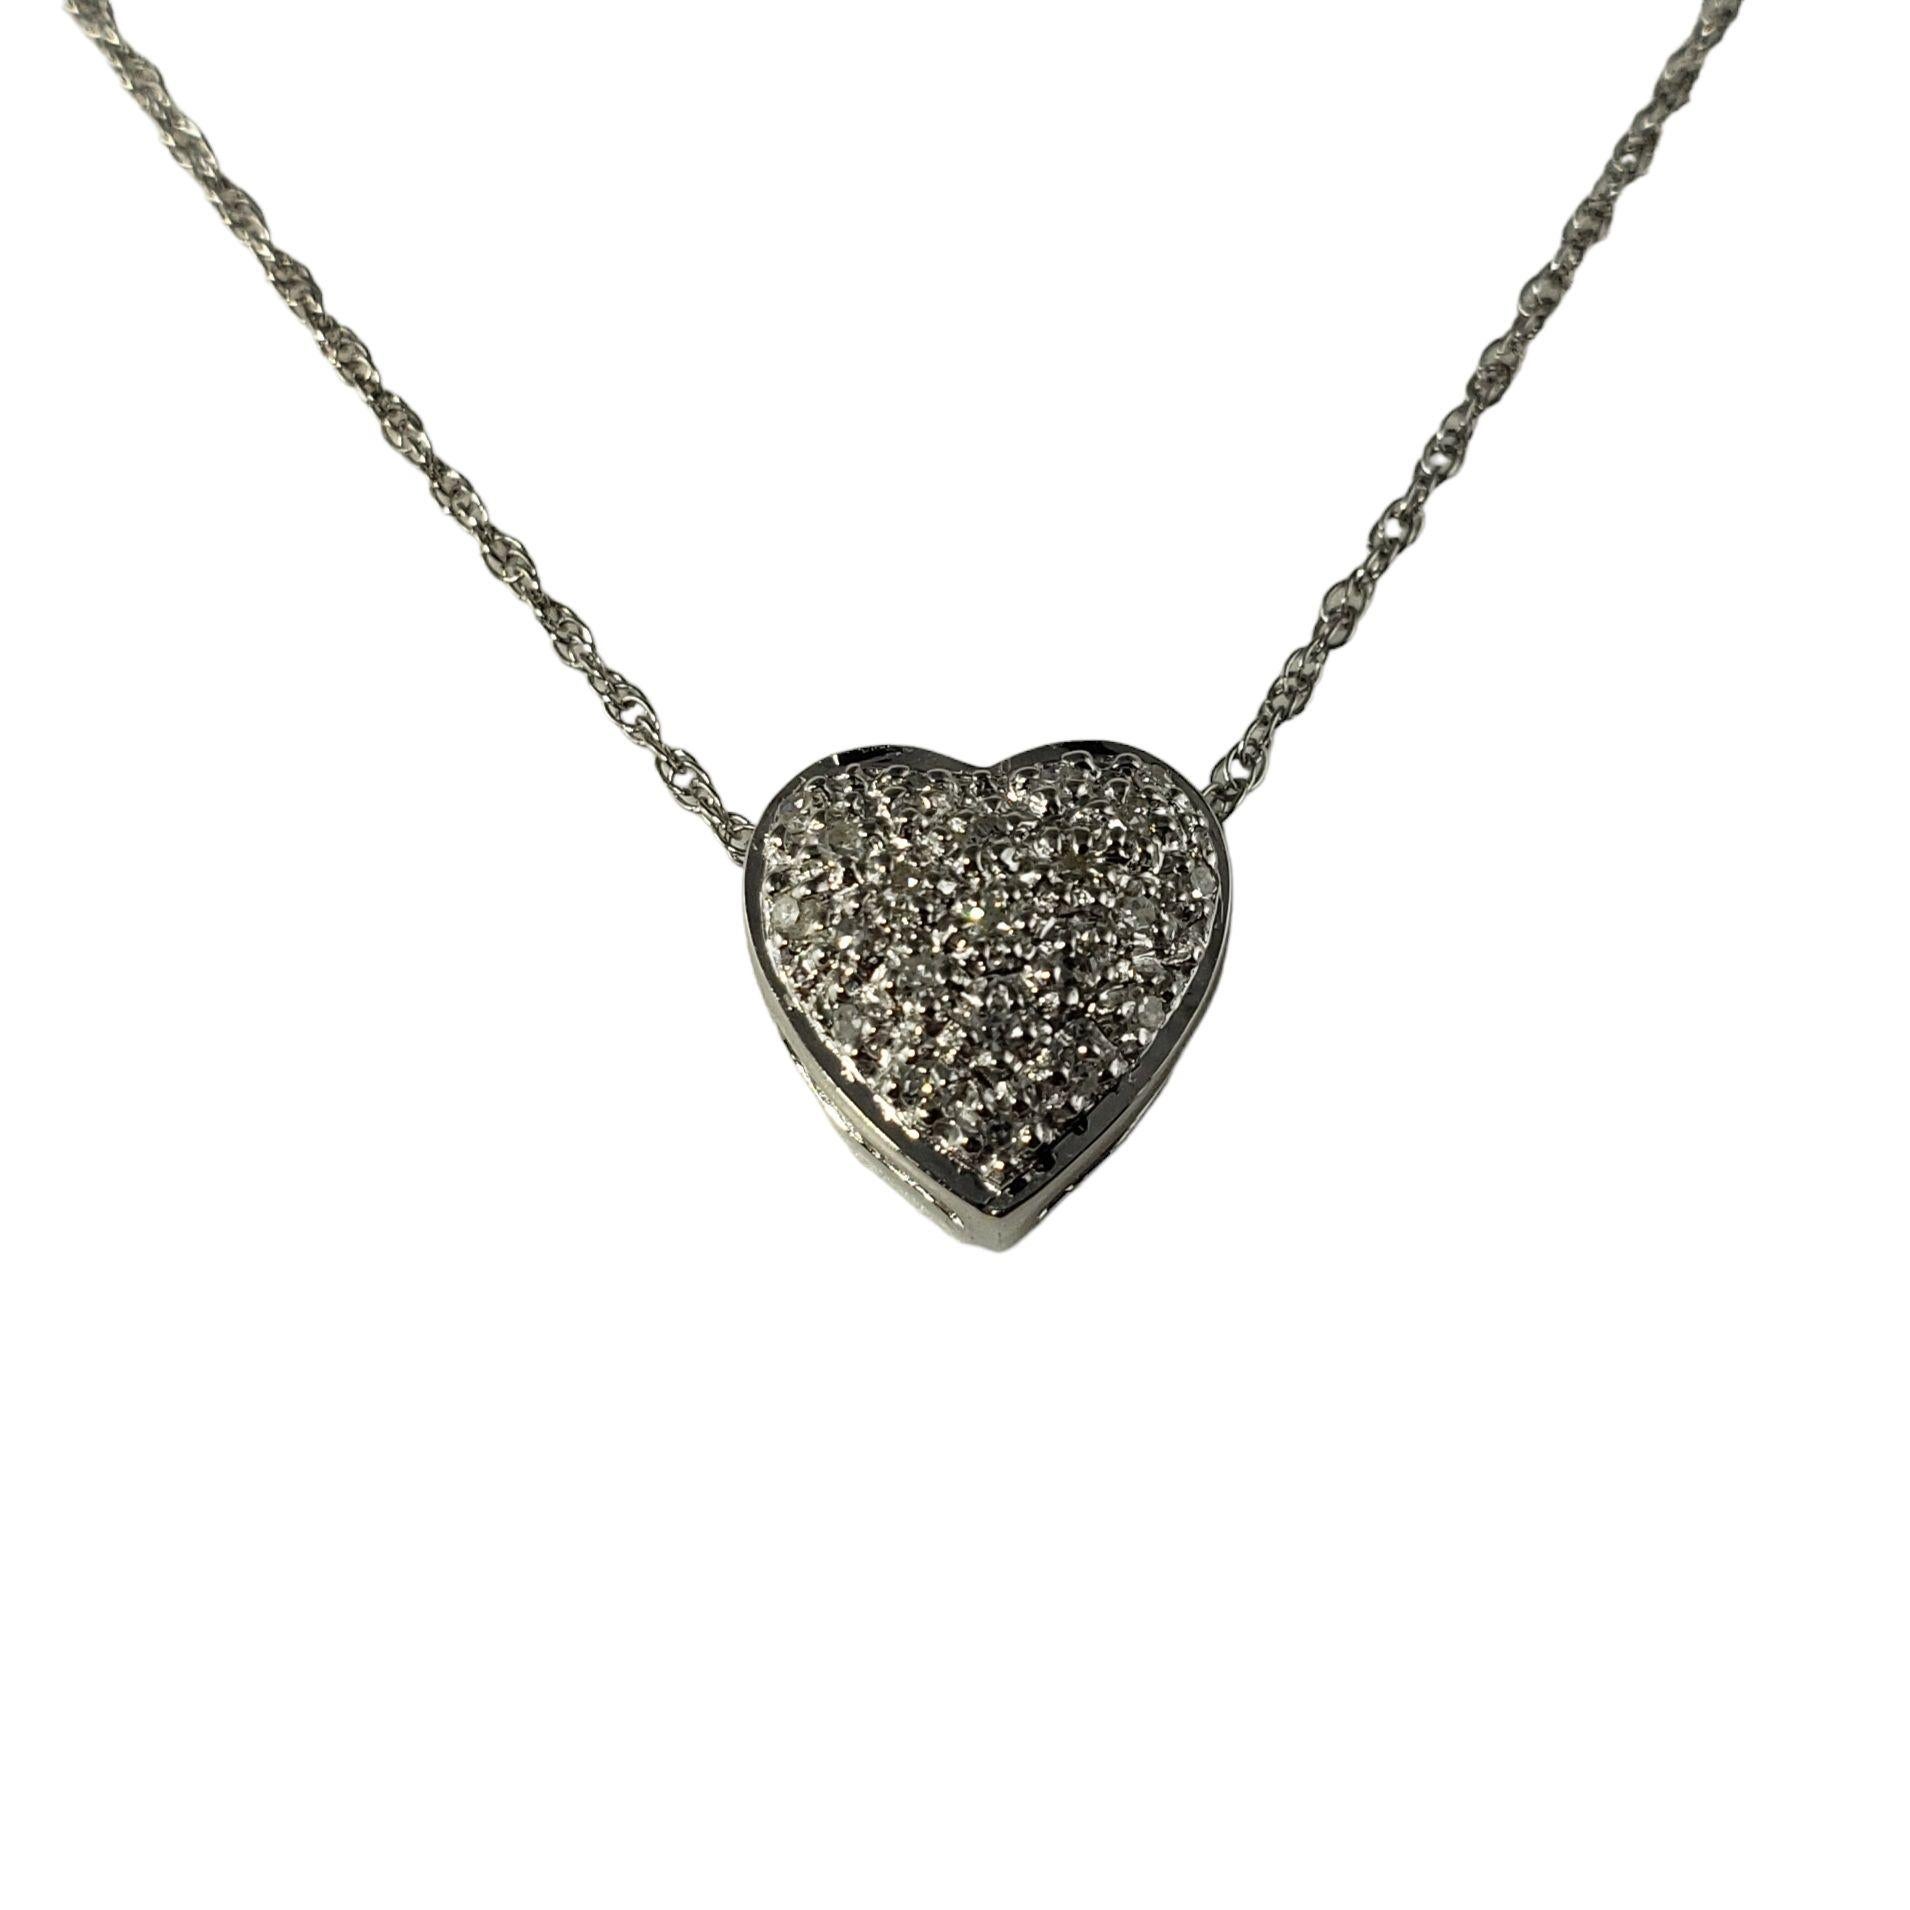 Vintage 14 Karat White Gold and Diamond Heart Pendant Necklace-

This sparkling heart pendant necklace features 15 round single cut diamonds set in beautifully detailed 14K white gold.

Approximate total diamond weight:  .15 ct.

Diamond clarity: